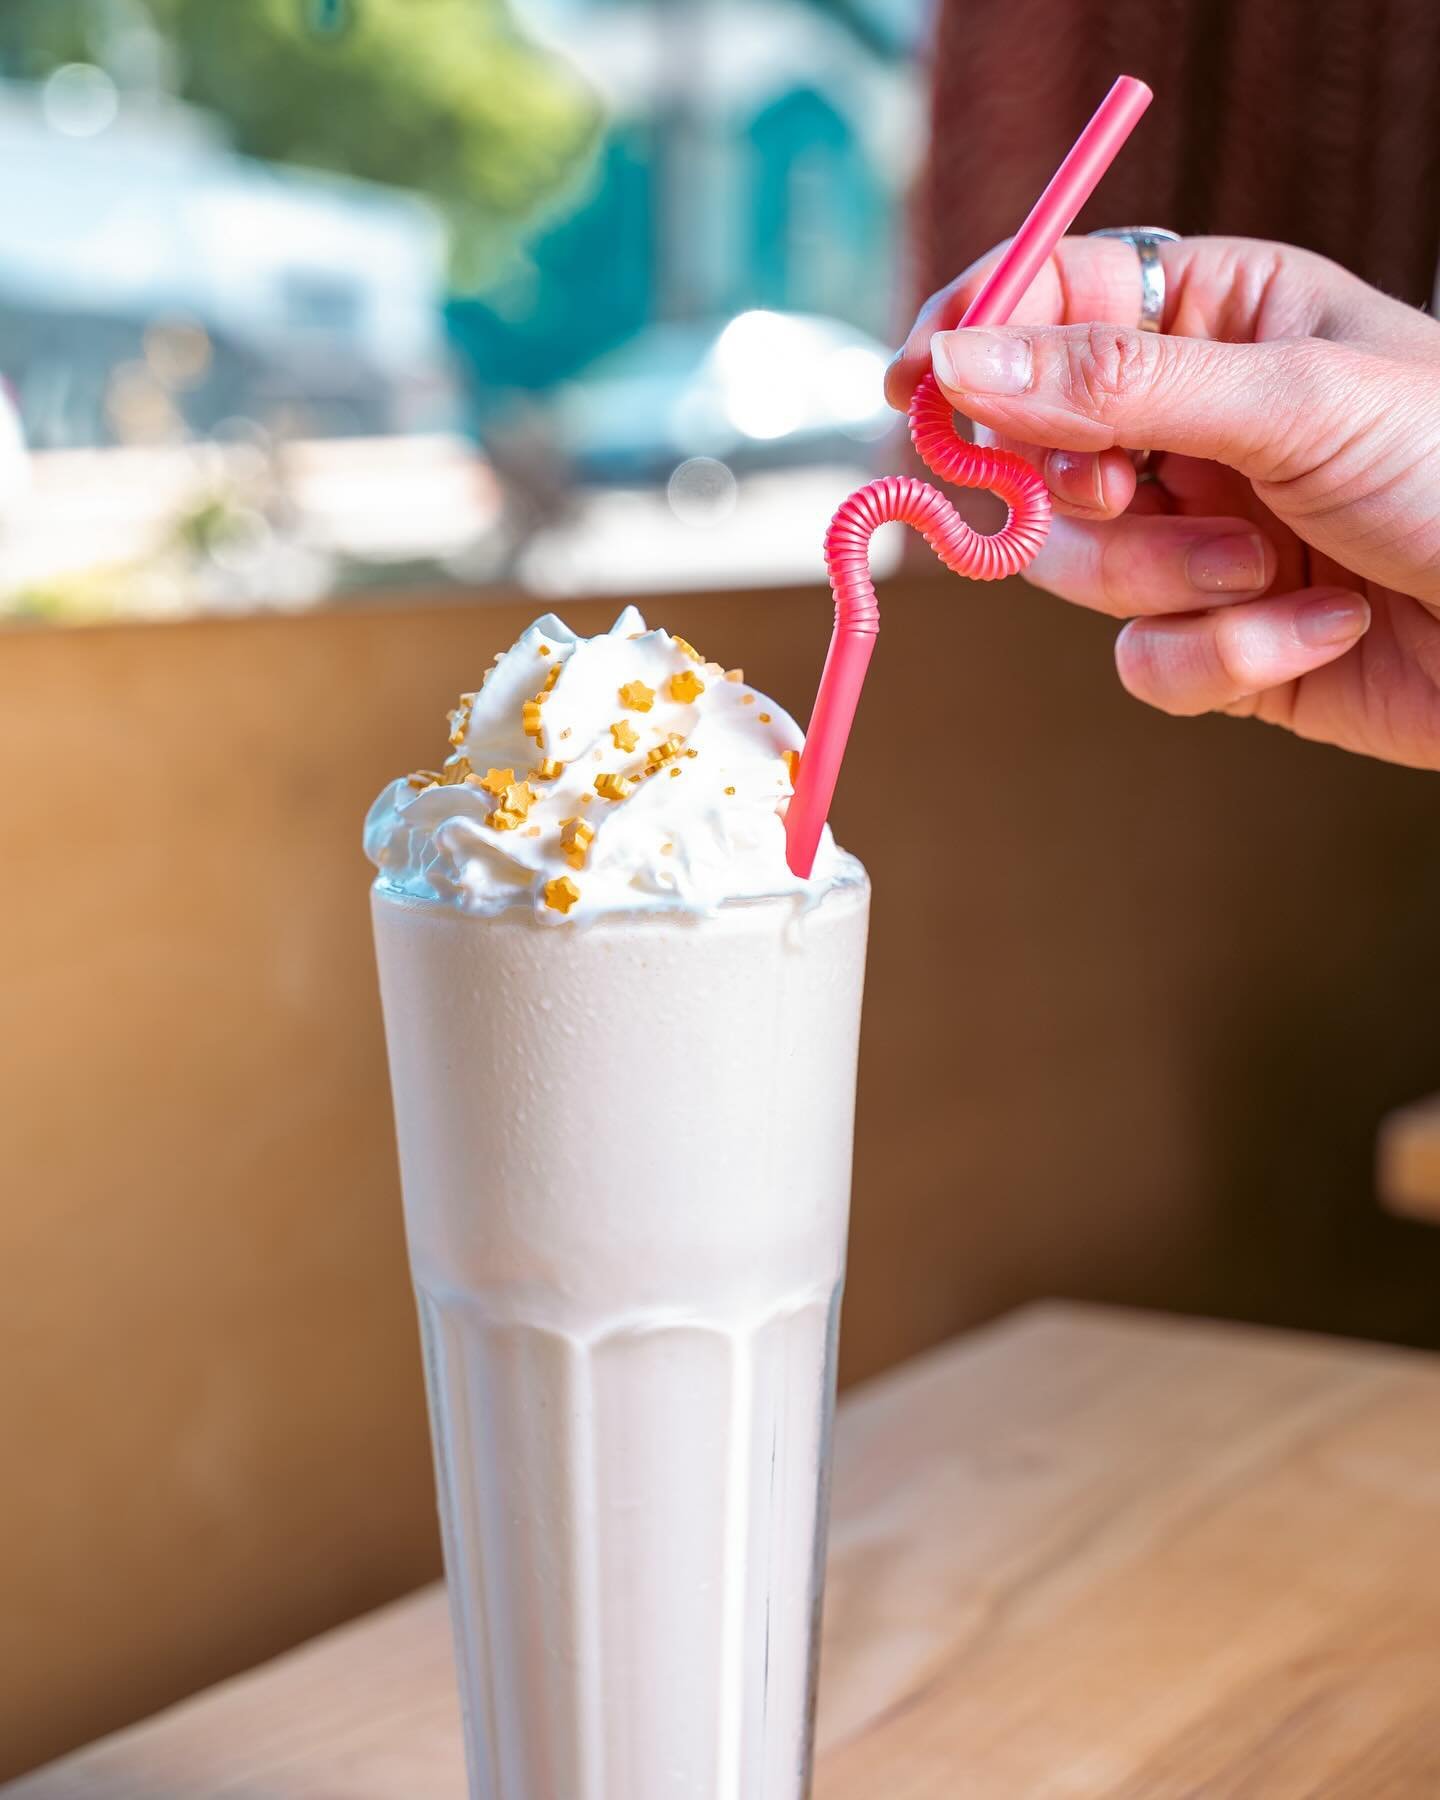 its muse being the porn star martini &mdash; so tell us what&rsquo;s in this good-time boozy Porn Star Milkshake topped with gold star sprinkles ✨⭐️✨⭐️✨⭐️✨

NEW SUNDAY HOURS ⭐️ 8AM to 4PM!